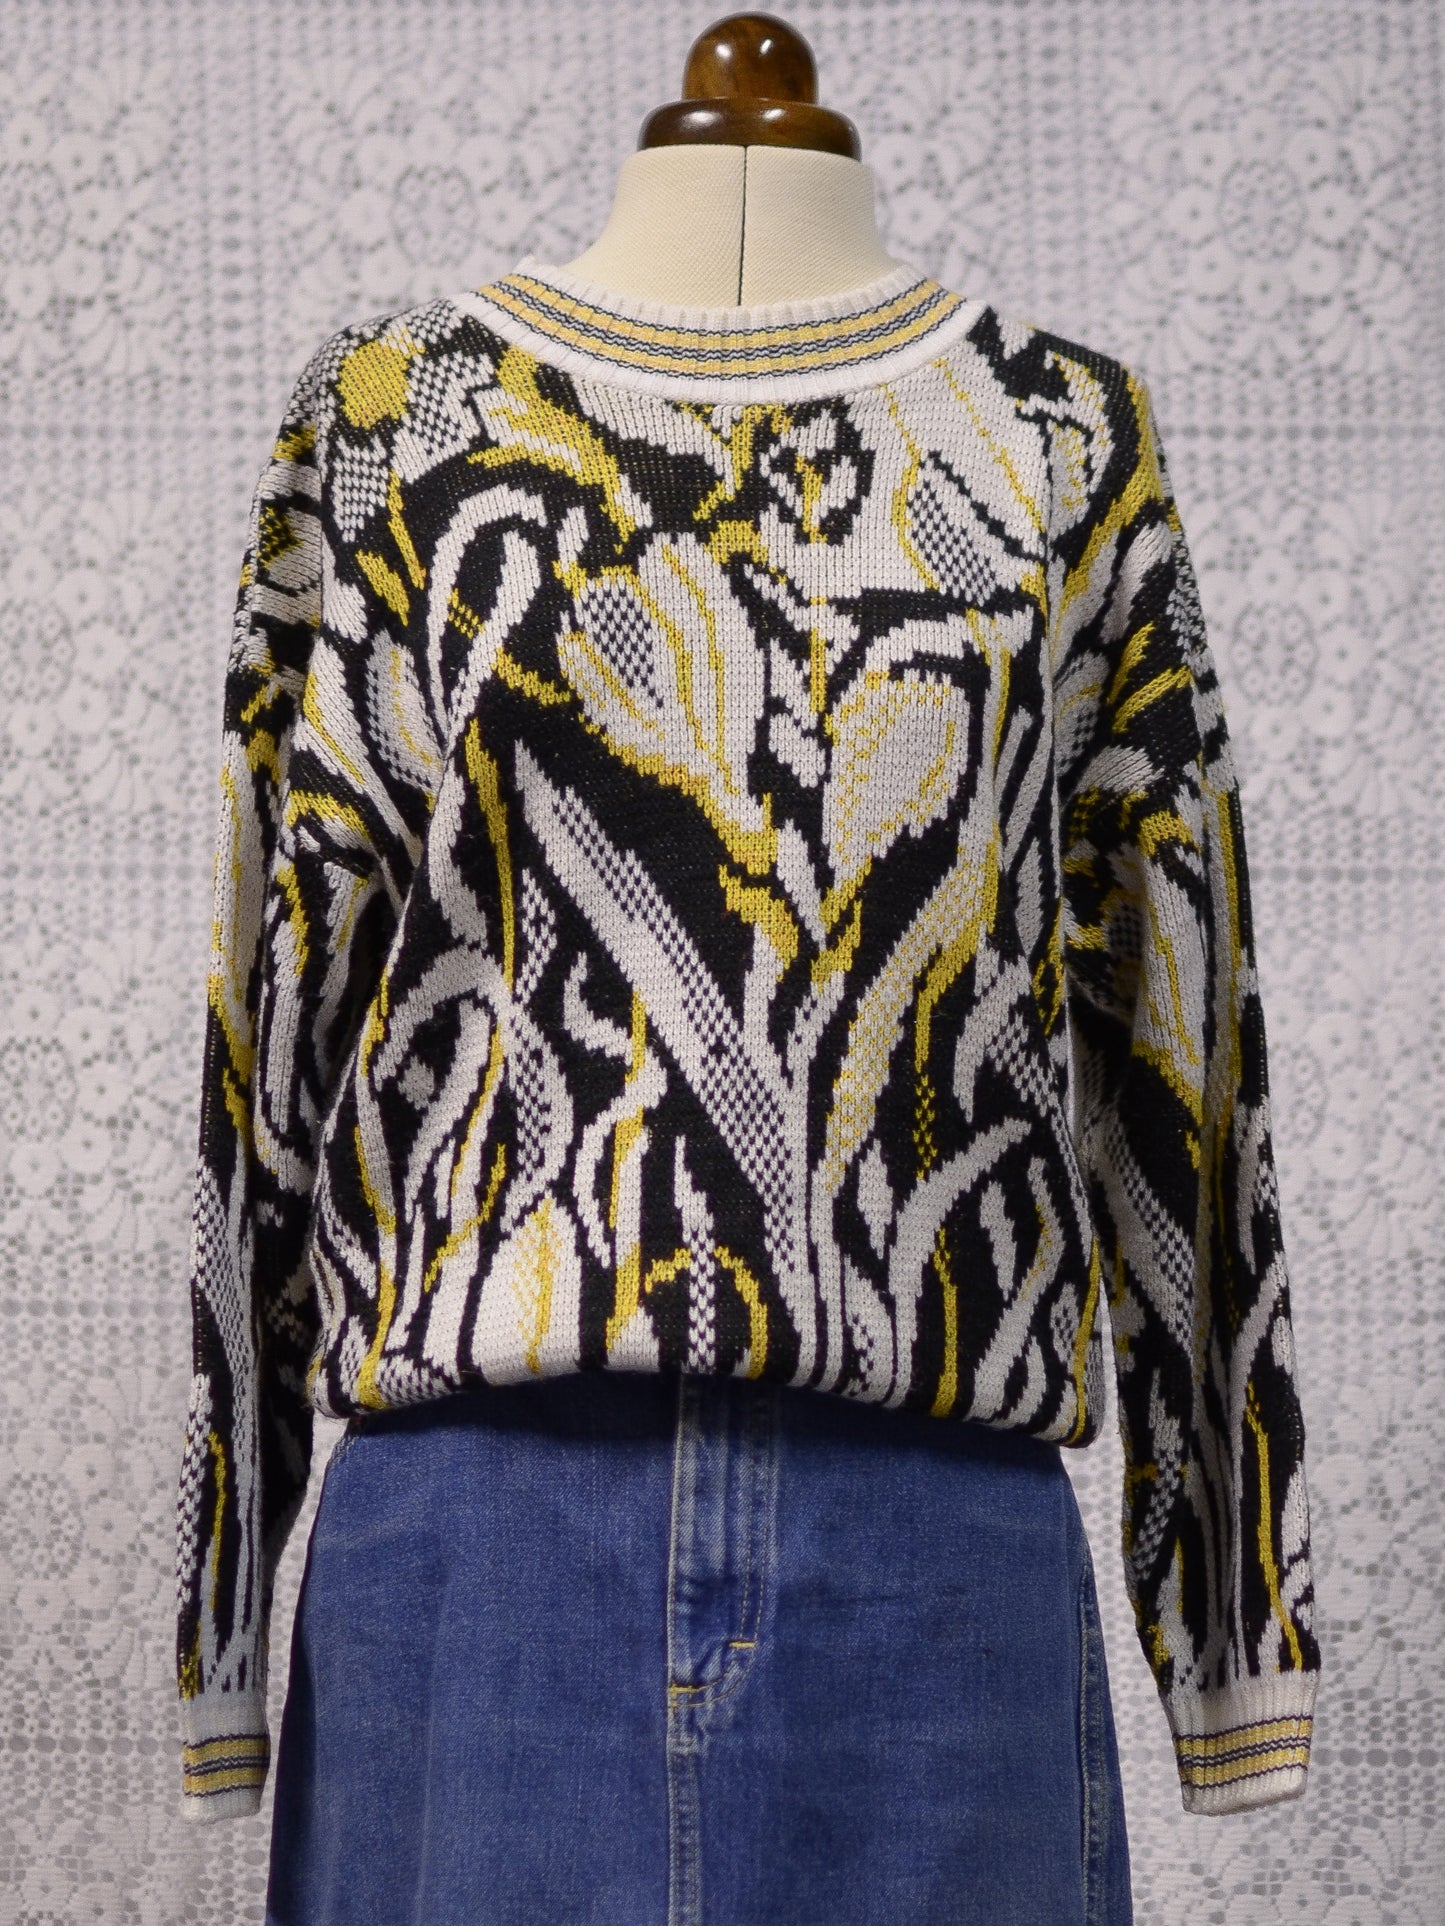 1980s black, white and yellow abstract floral jumper